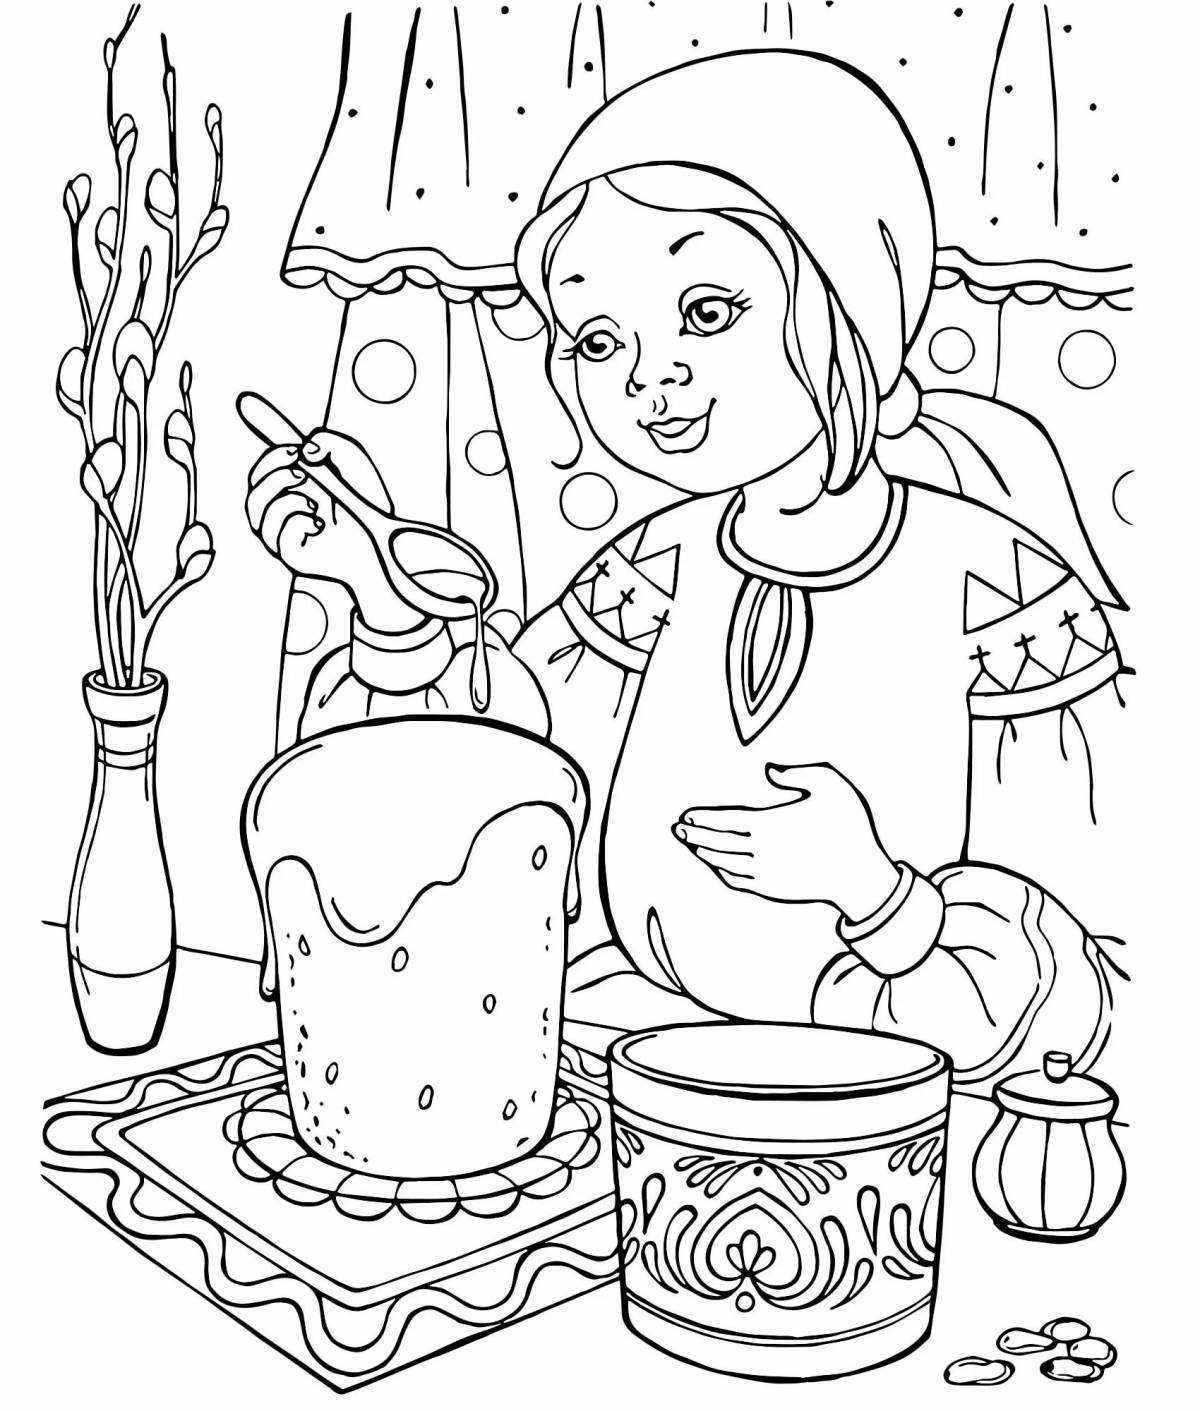 Coloring book bright Russian traditions